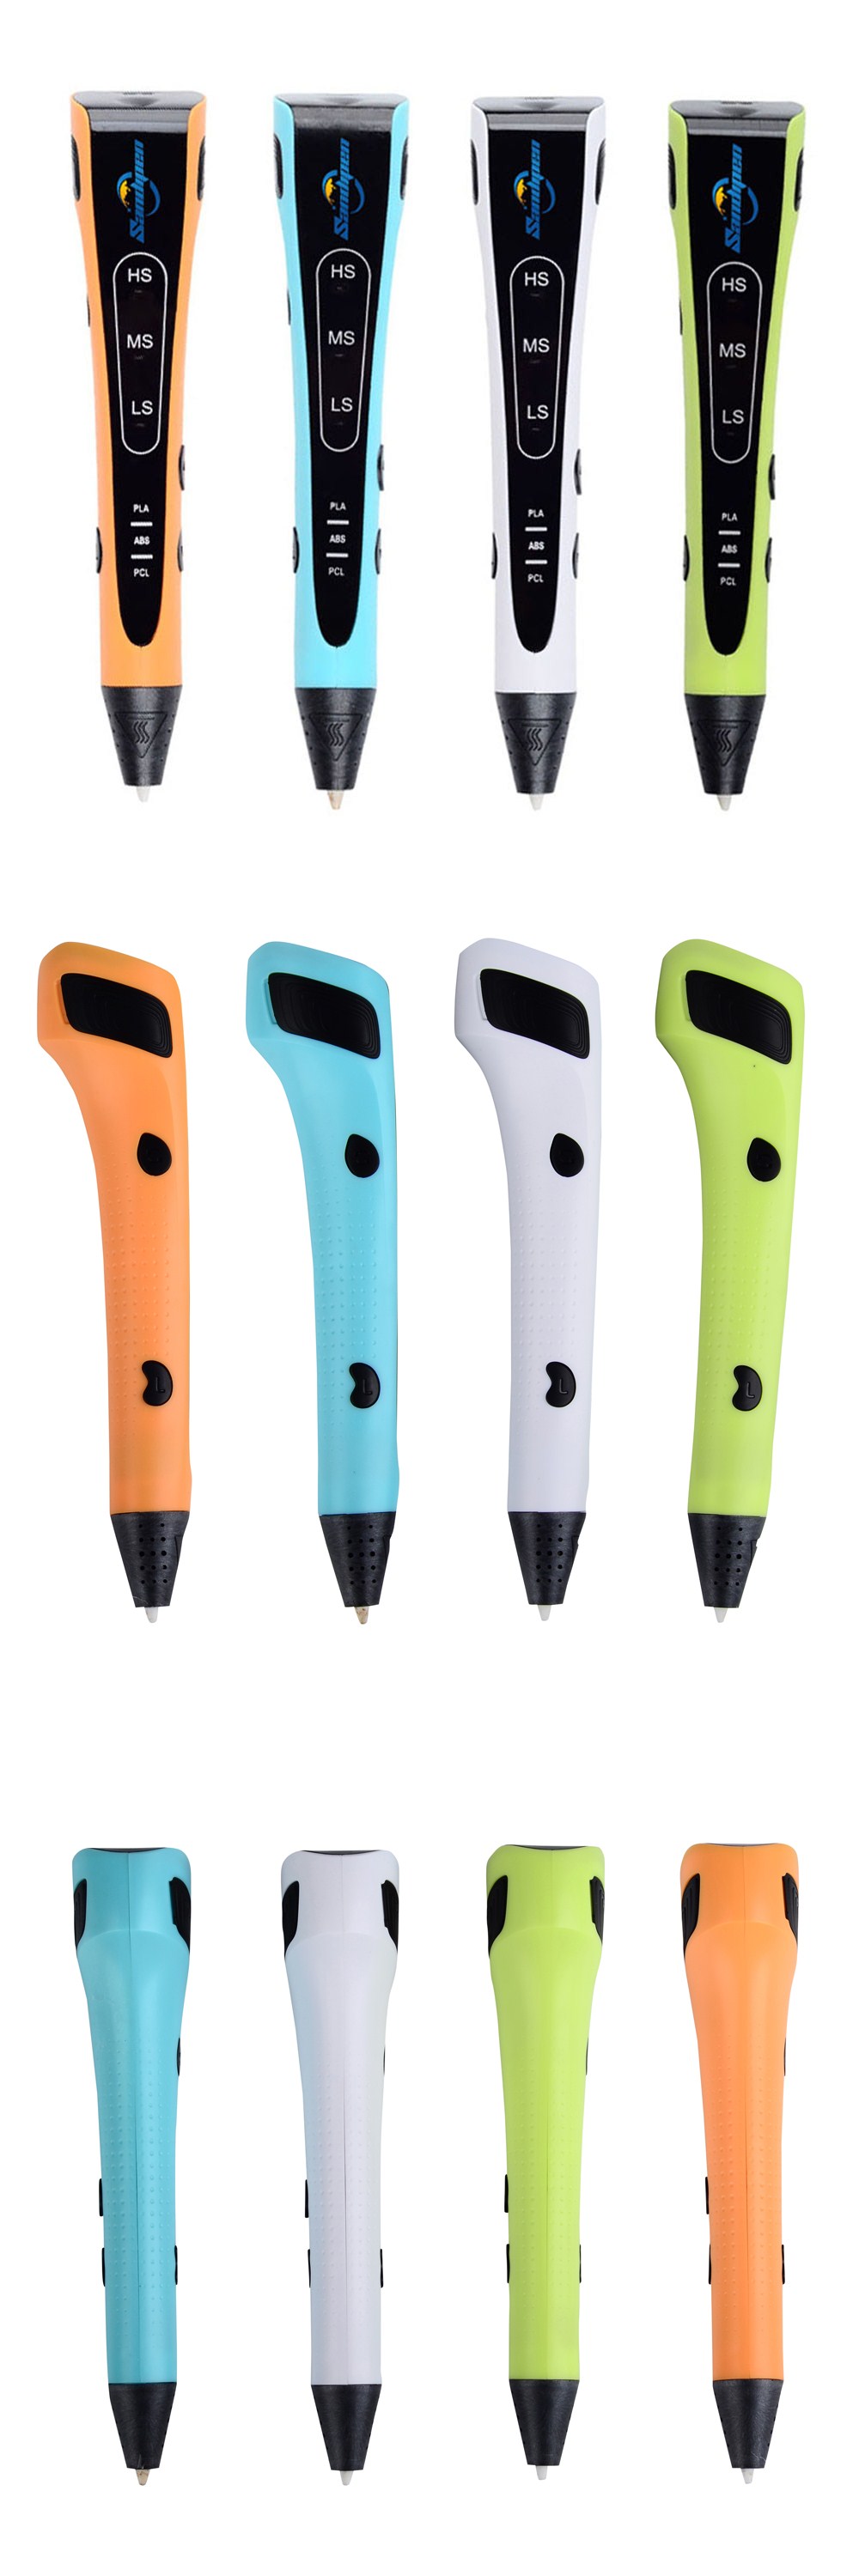 Orange/Blue/Green/White110-240V 3D Printing Pen for ABS/PLA/PCL Filament Support Adjustable Speed 13